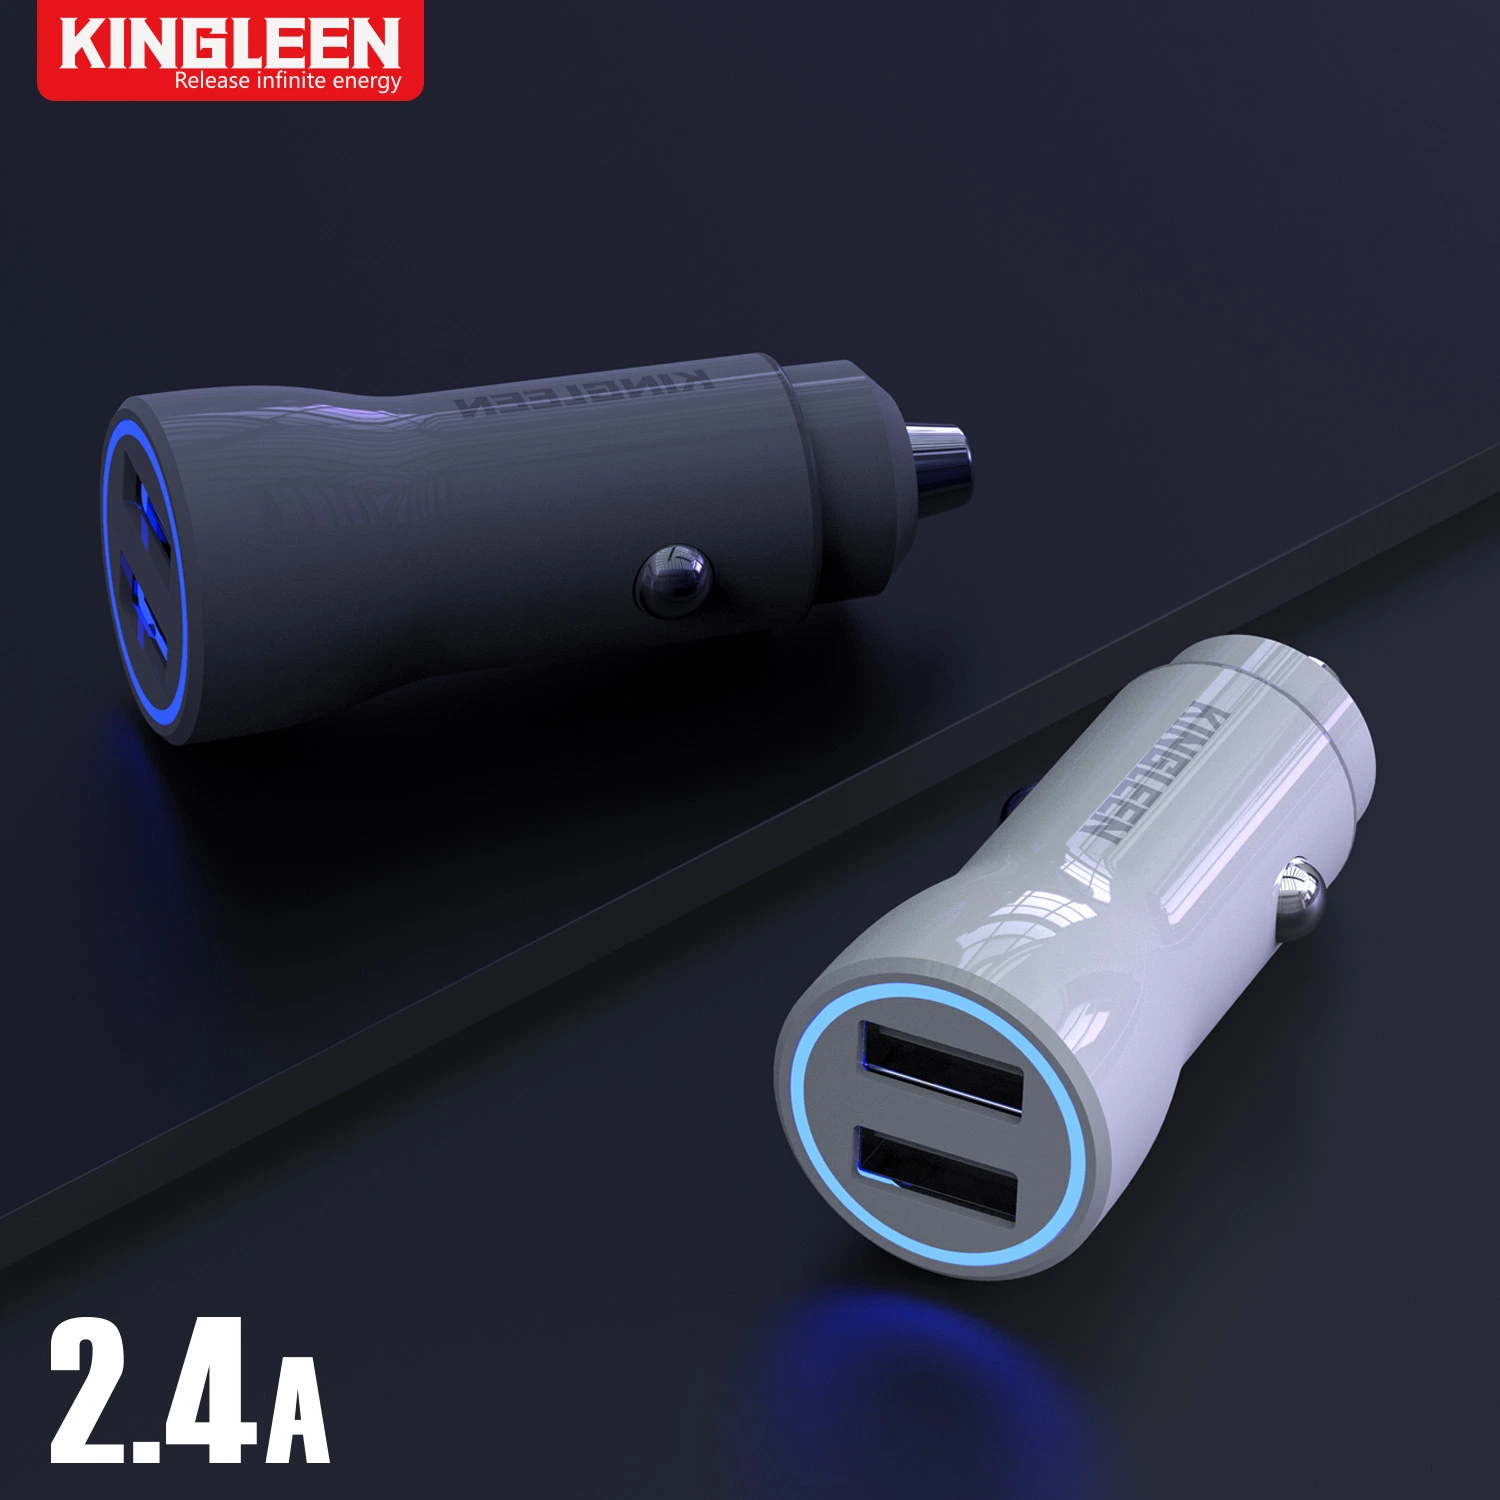 2.4A LED Light Dual USB Port Fast Charging Car Adapter Charger for Car